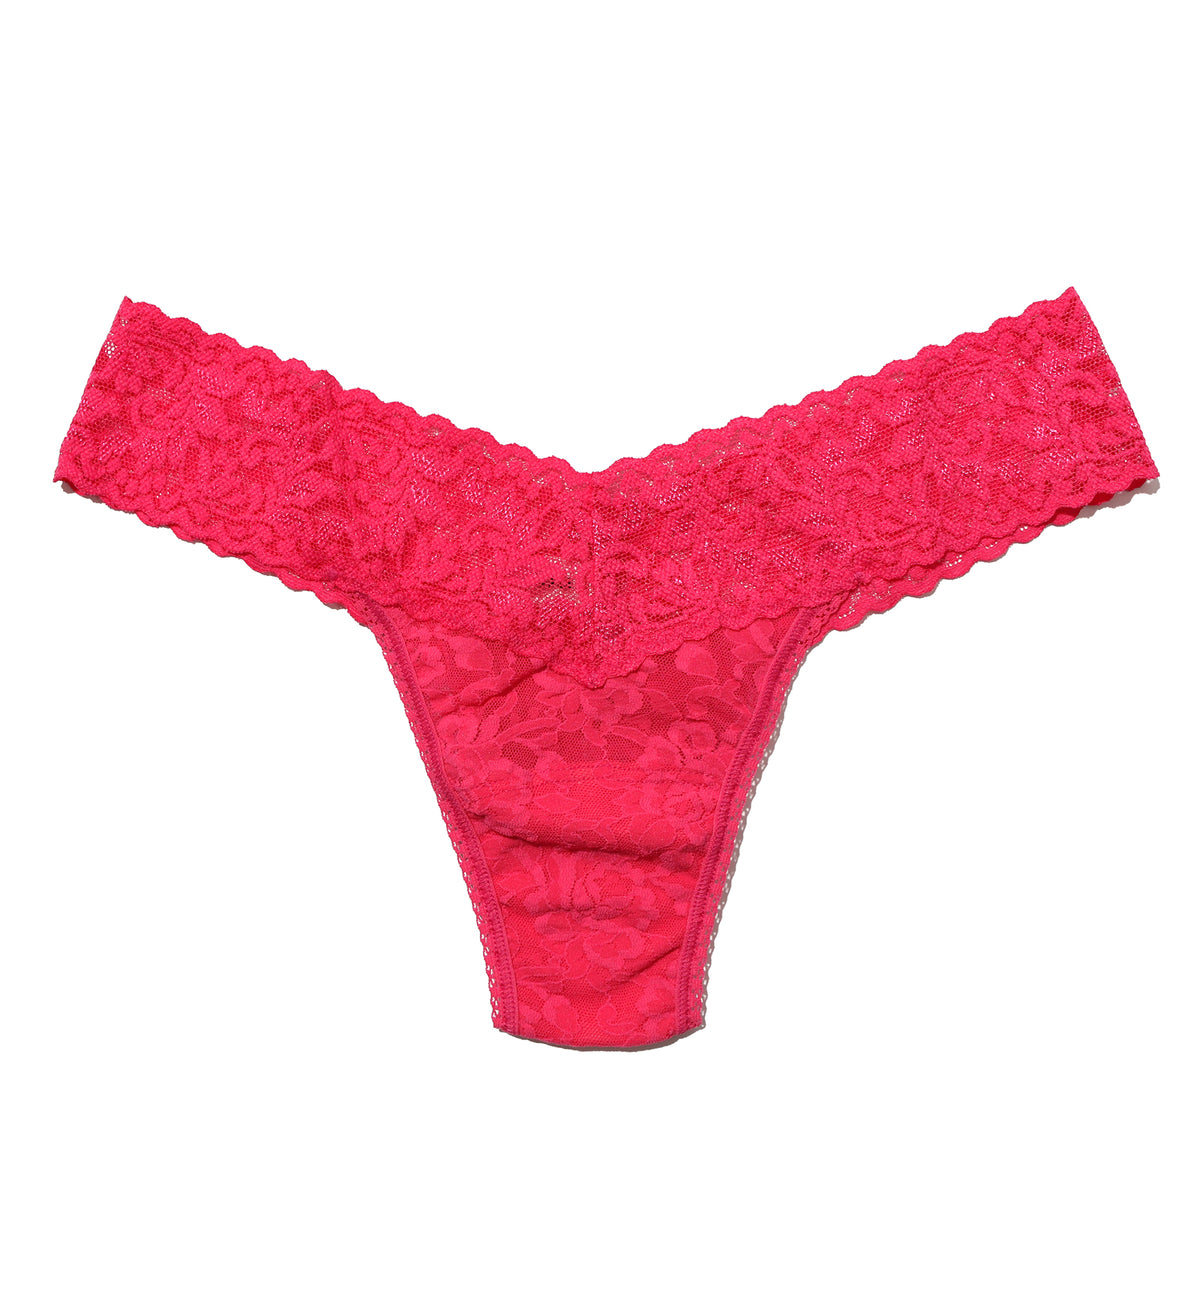 Hanky Panky Signature Lace Low Rise Thong (4911P),Vivid Coral - Vivid Coral,One Size